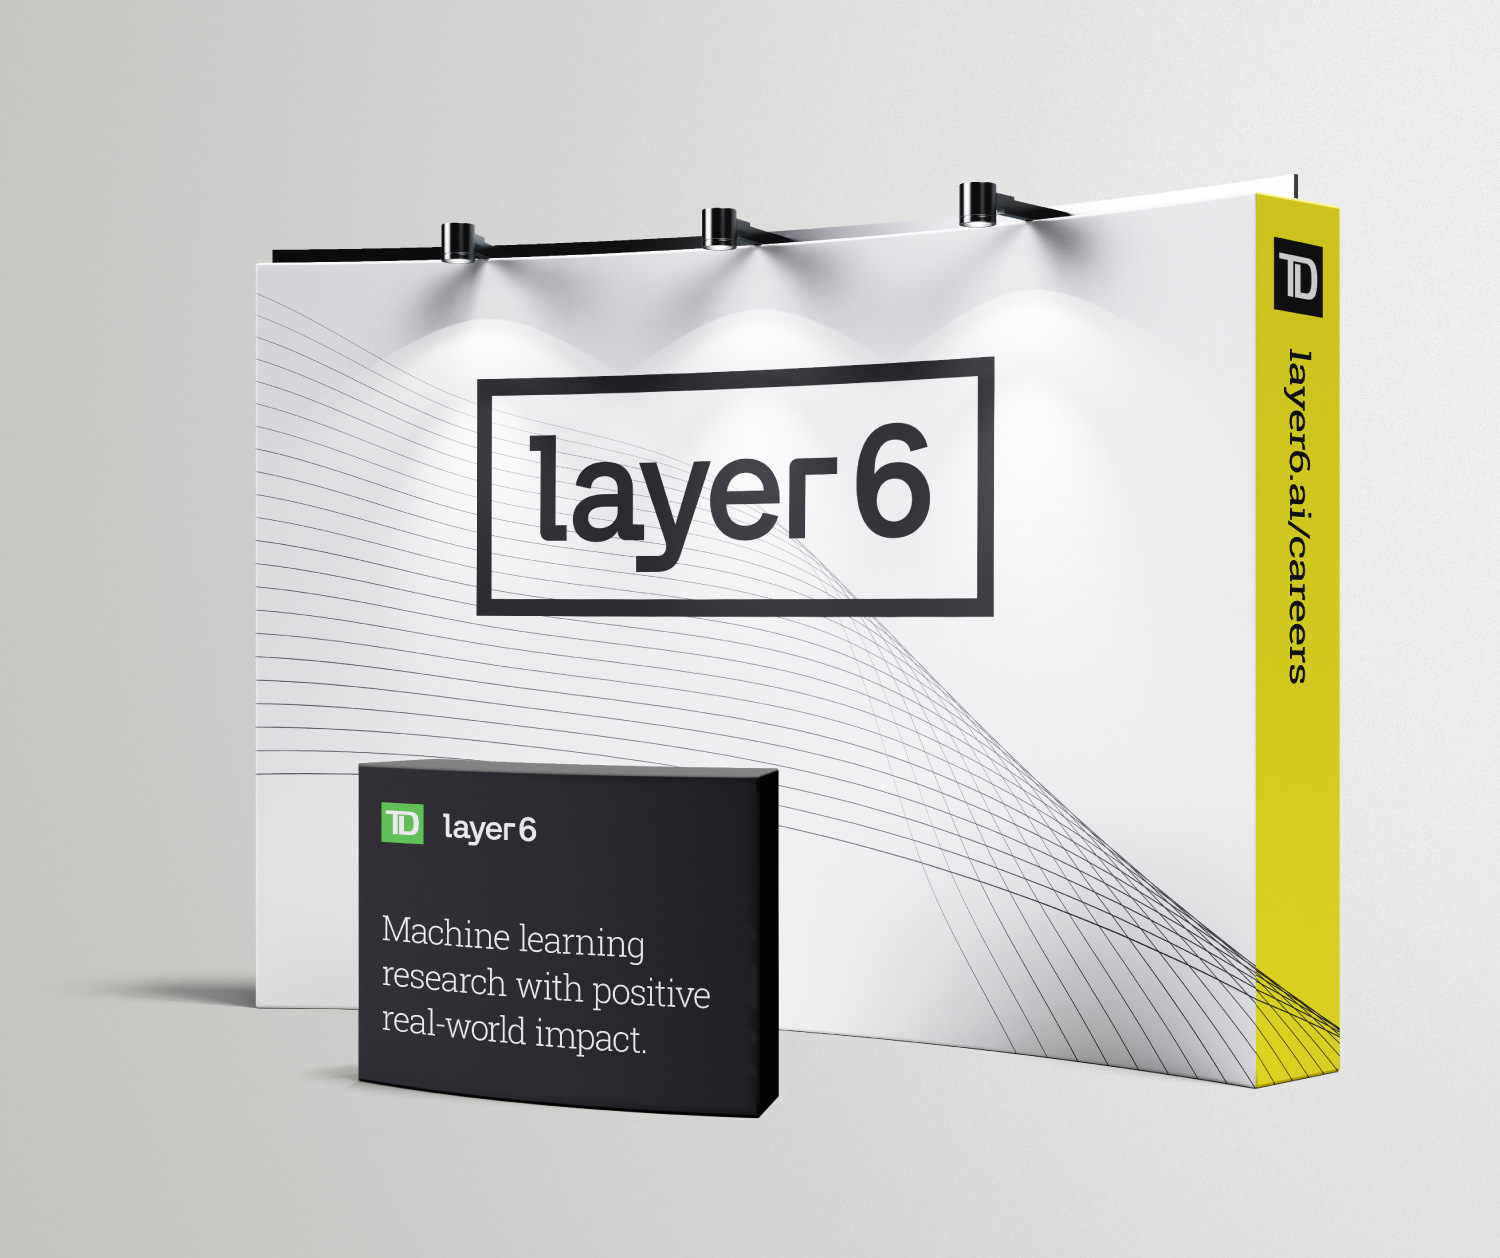 Tradeshow booth design concept for Layer 6 and TD Bank featuring prominent logo design and large linear elements